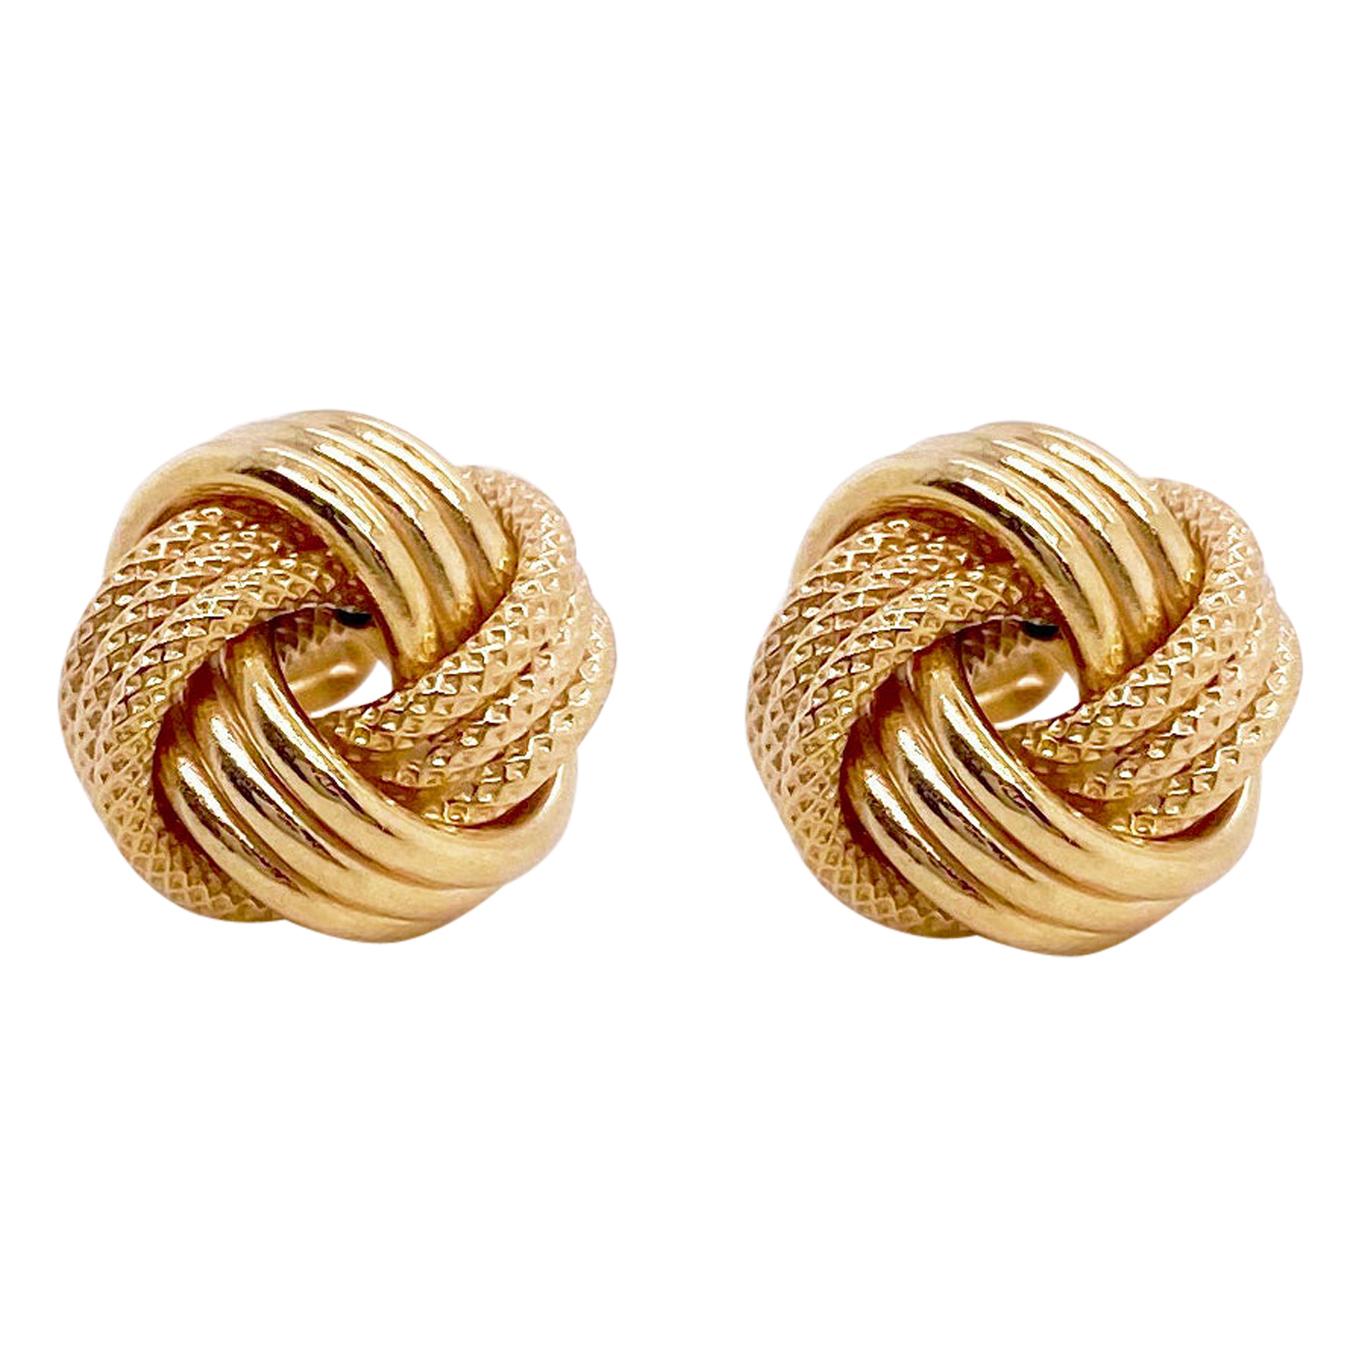 Details about   14k Solid White Gold Love Knot Cable Design Style Stud Post Earrings Gift 